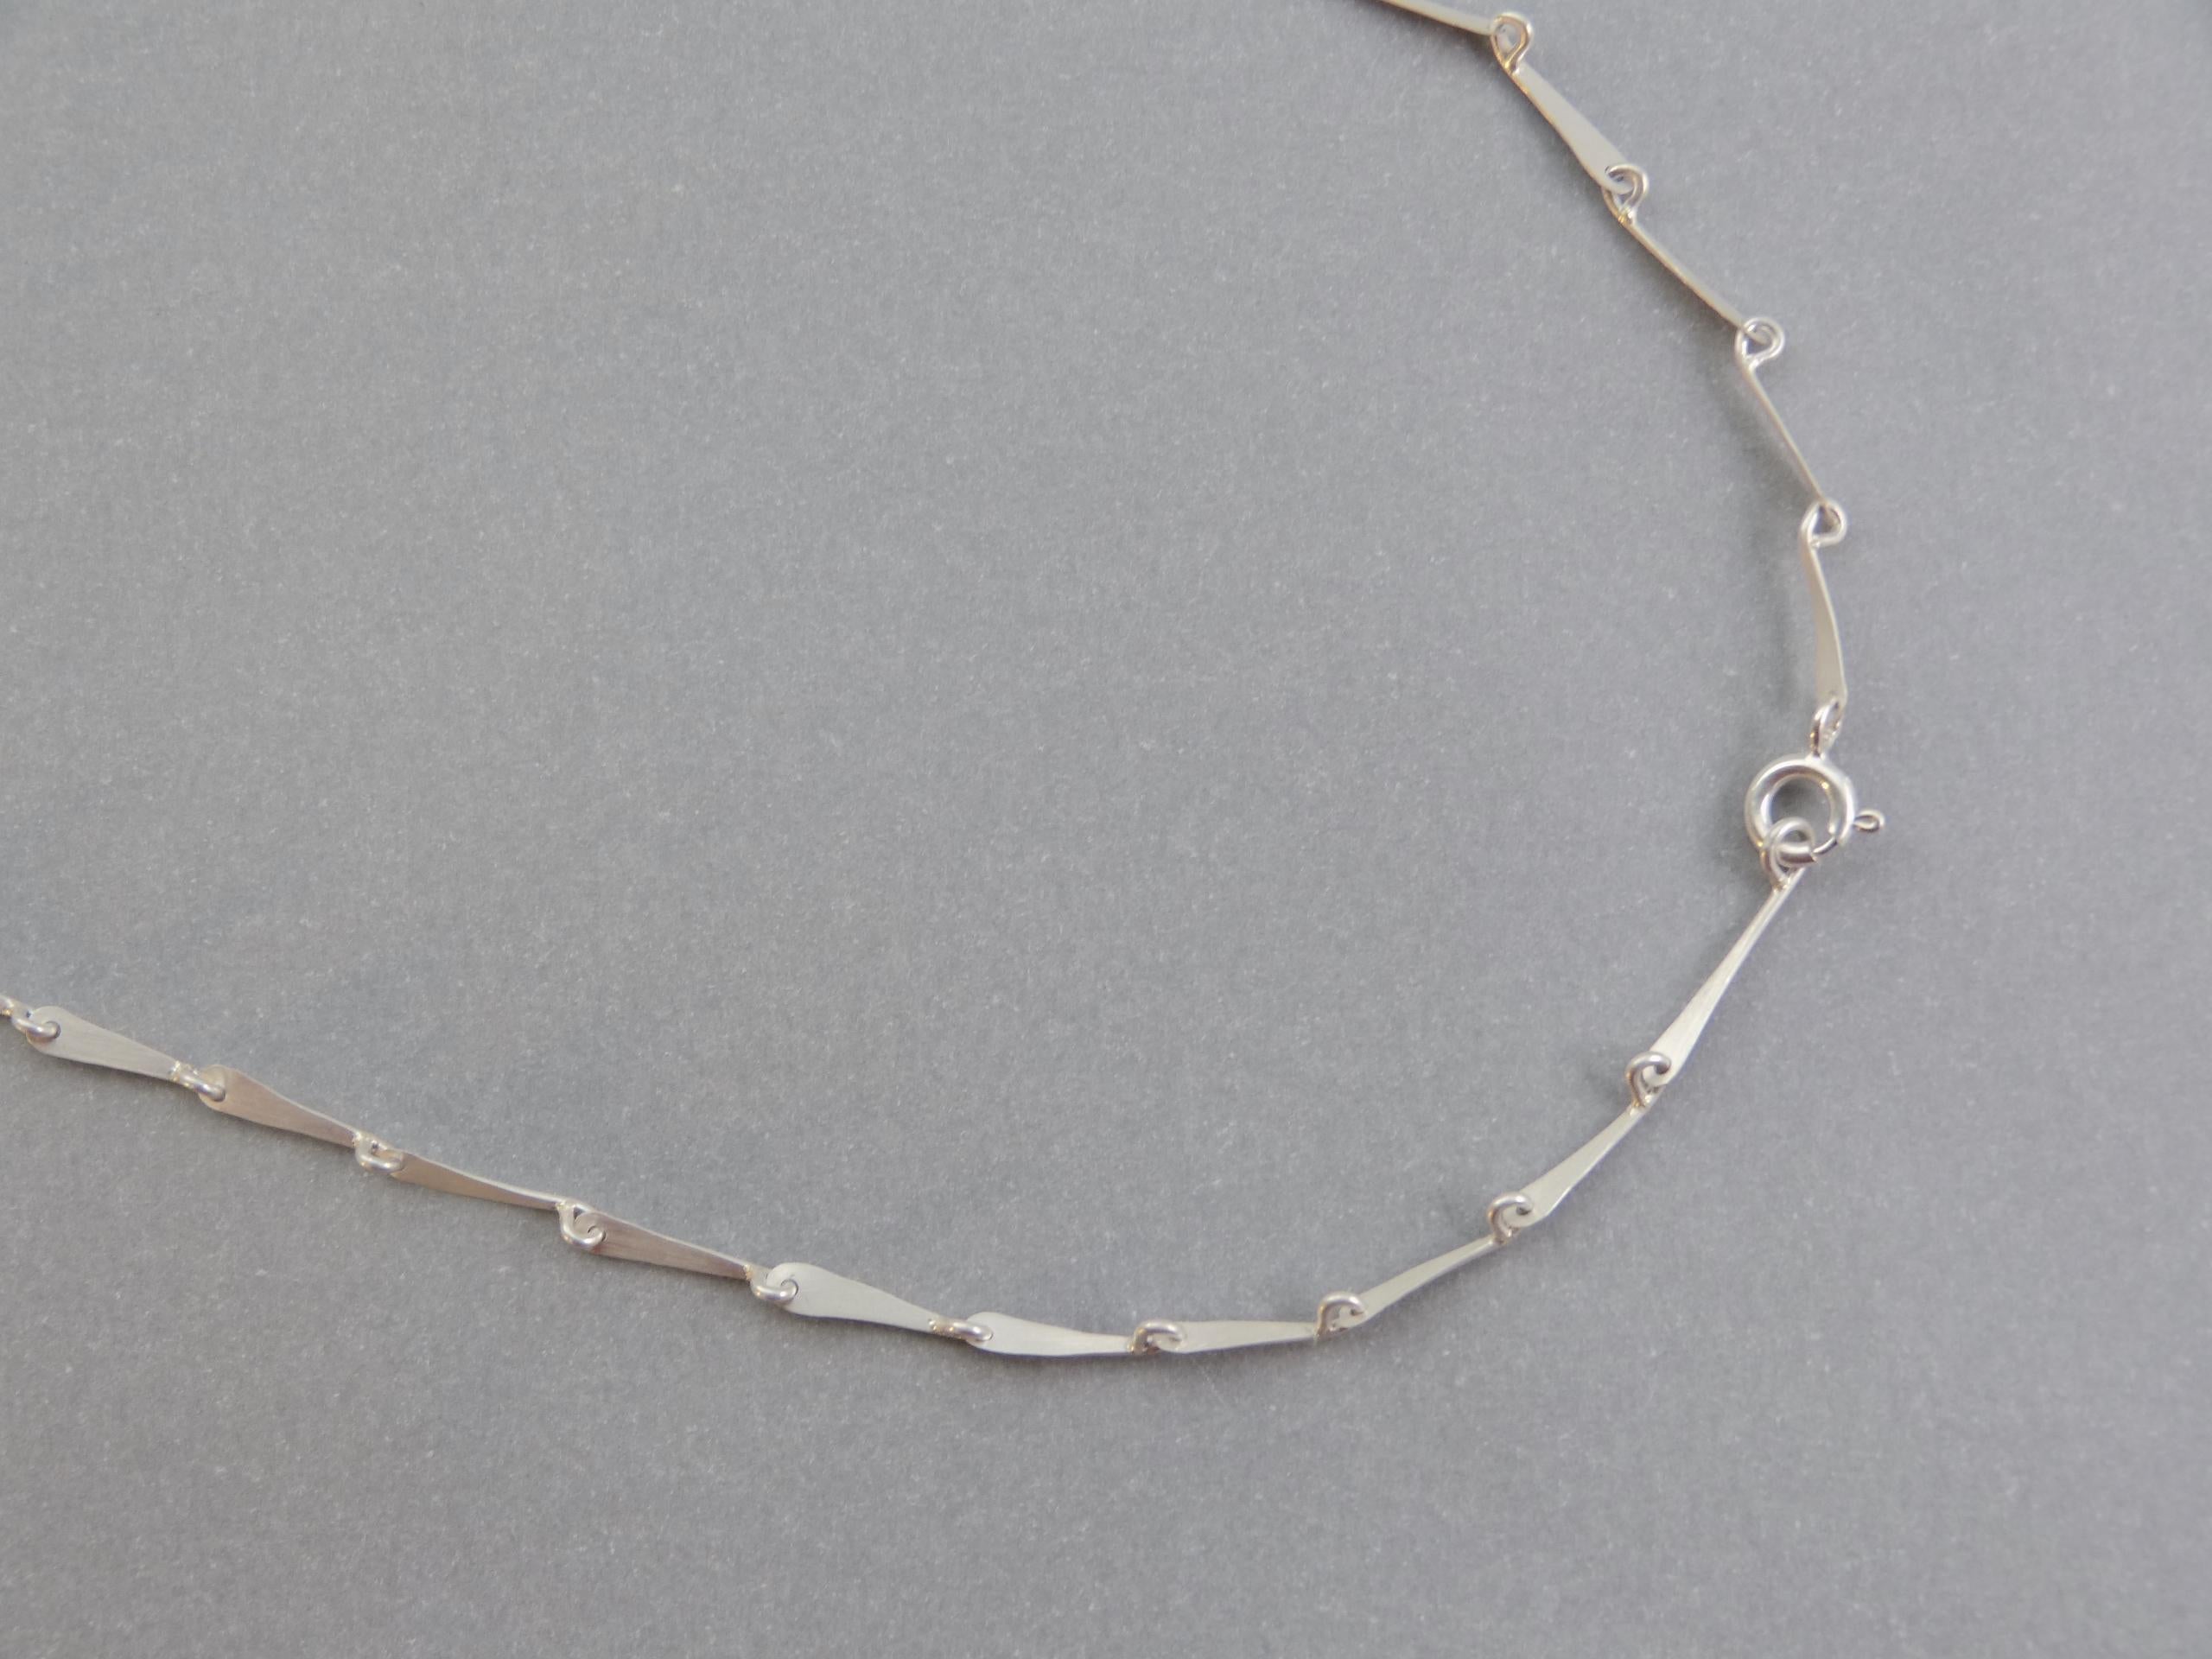 This lightweight handmade chain bracelet is the perfect everyday statement. Flowy delicate chain, inspired by the articulated legs of insects. 

It is fabricated from sterling silver forged links, and is finished with a matte sheen to subtly catch